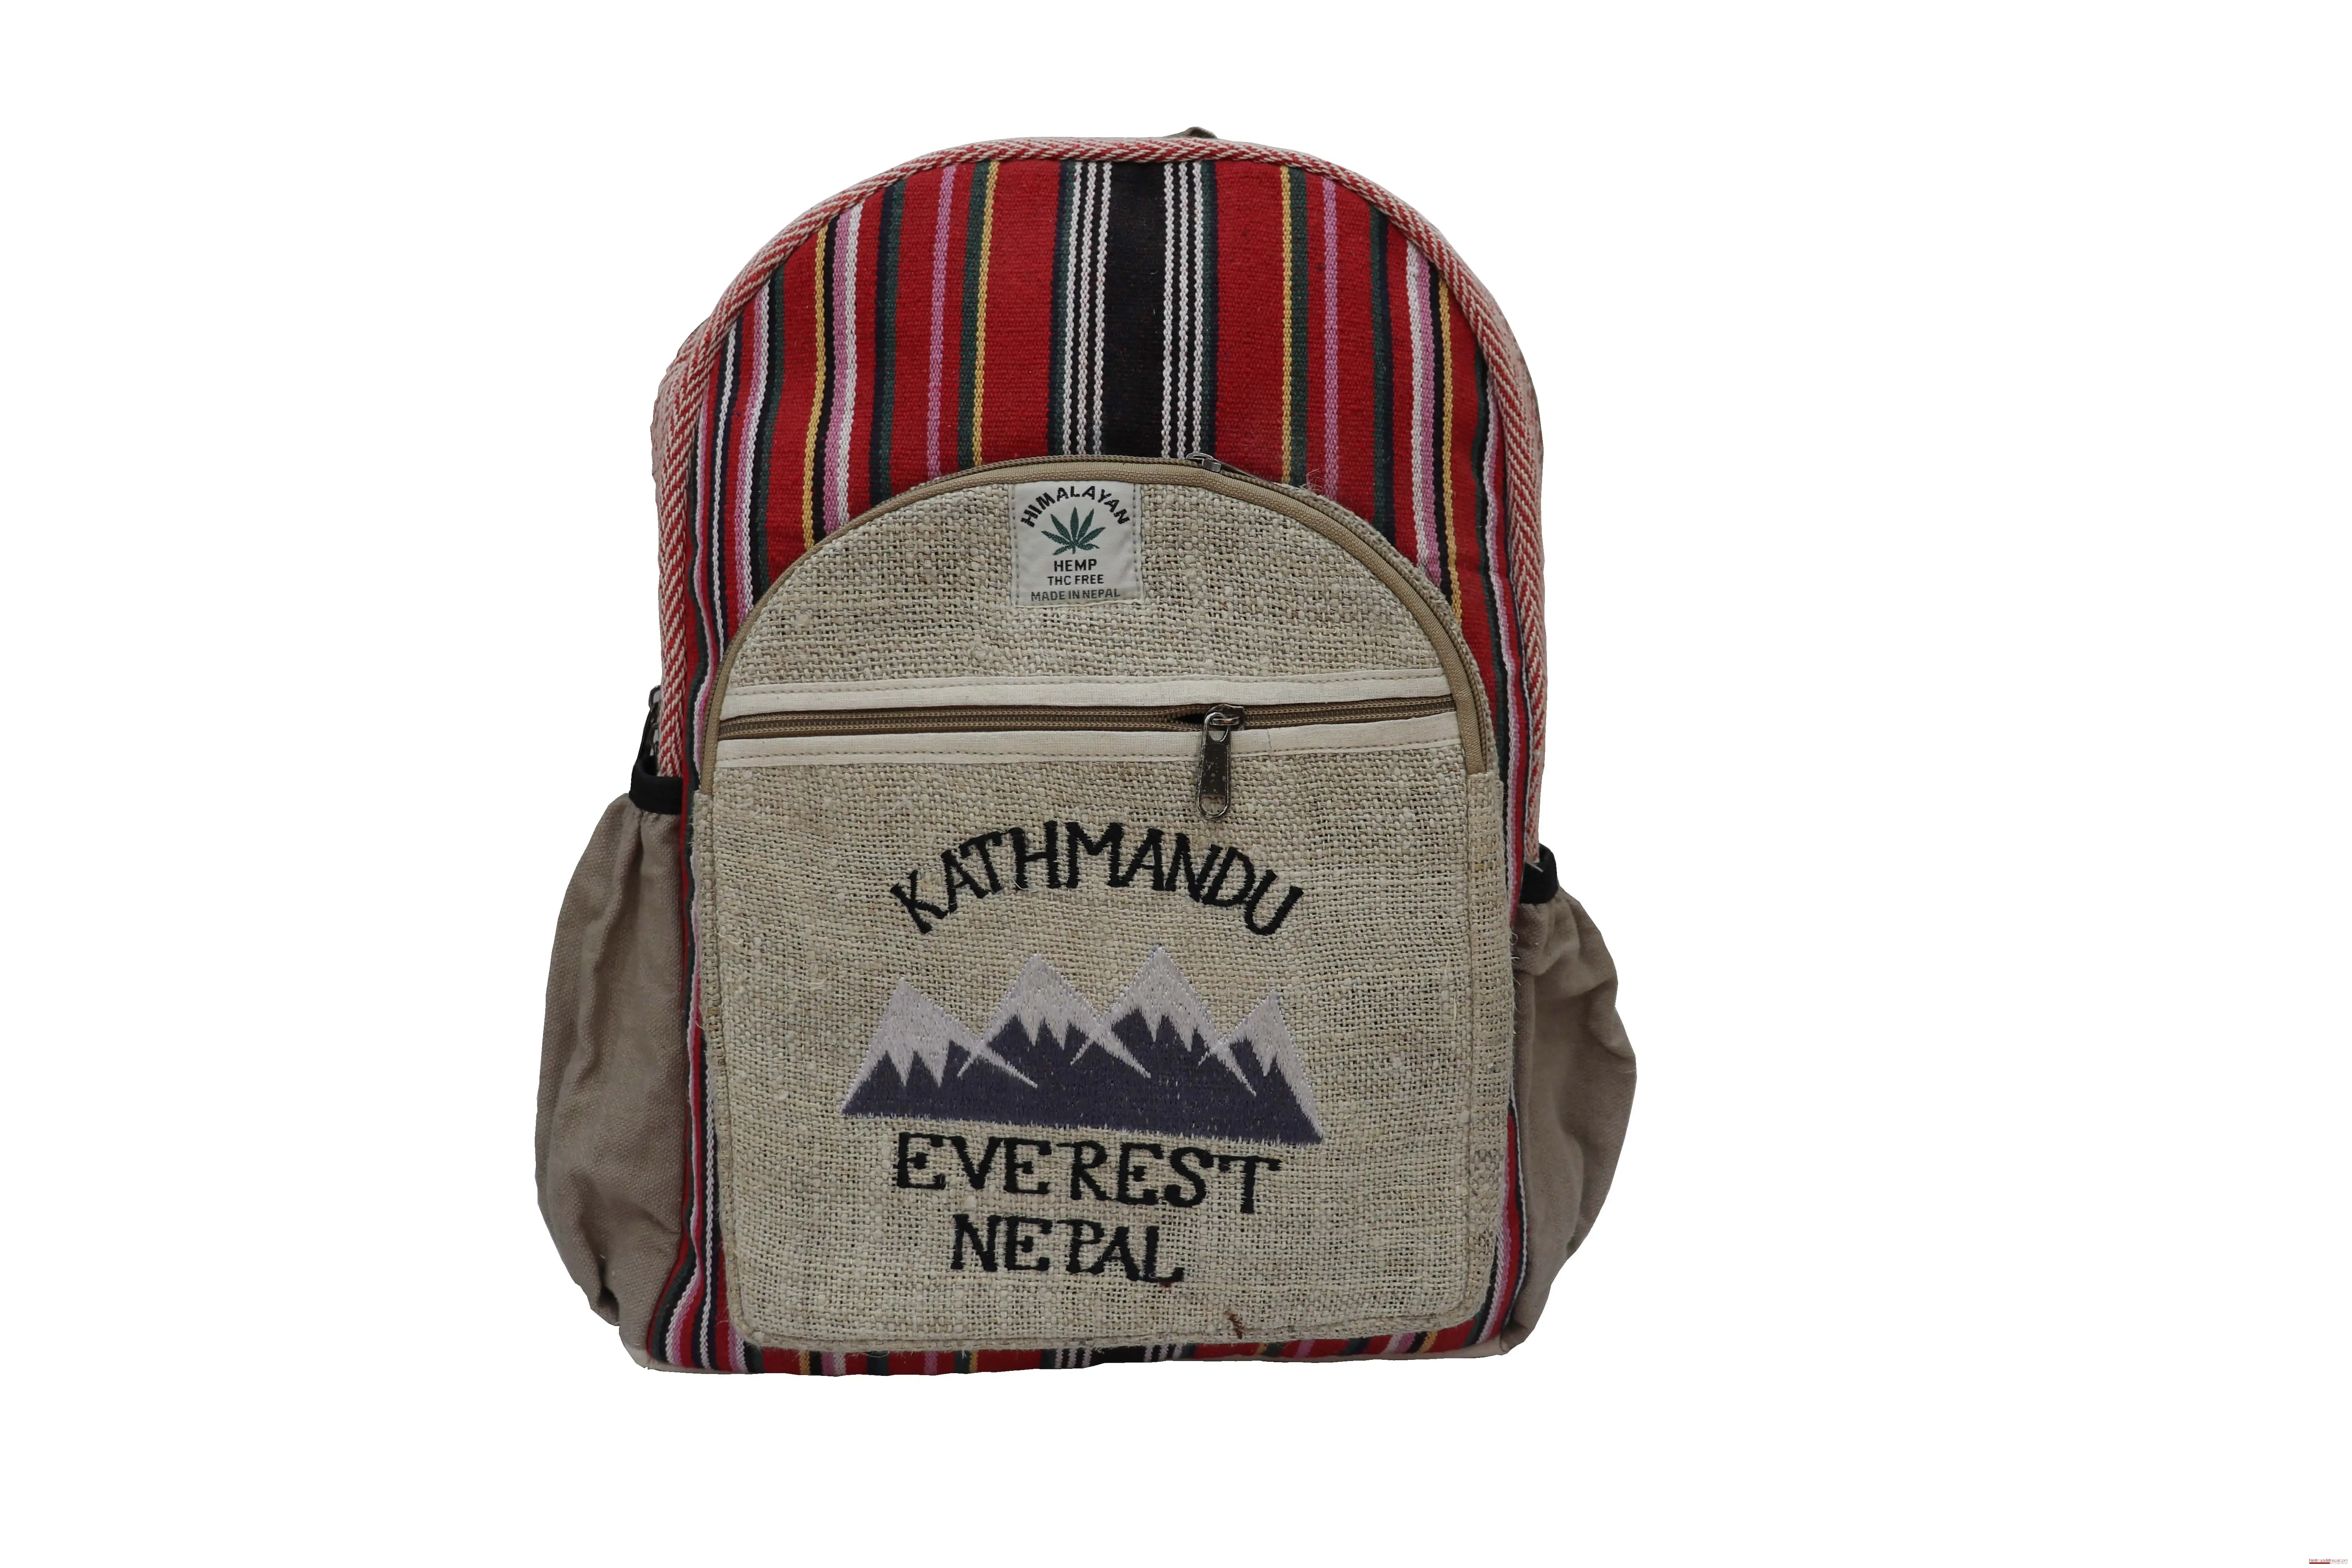 LONGING TO BUY A Cute All Natural Handmade Himalayan Hemp Backpack/Traveler  Bag, A Great Product - God Siva Designed : Amazon.in: Computers &  Accessories